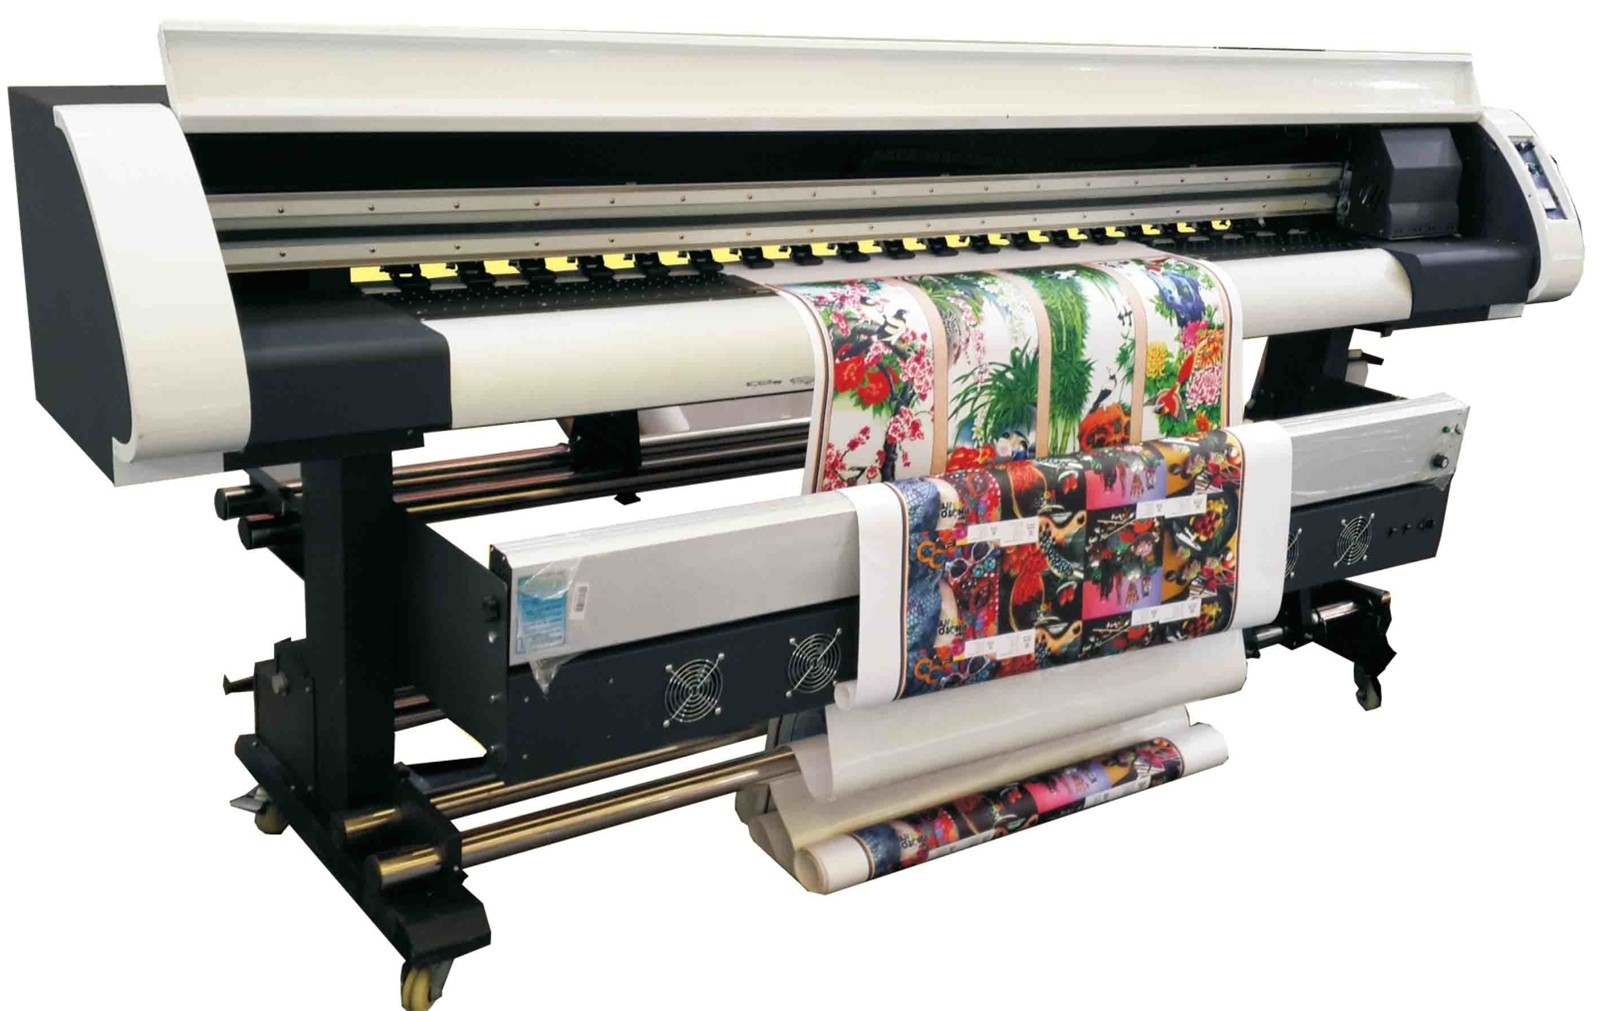 digital-printing-companies-and-tips-for-digital-printing-projects